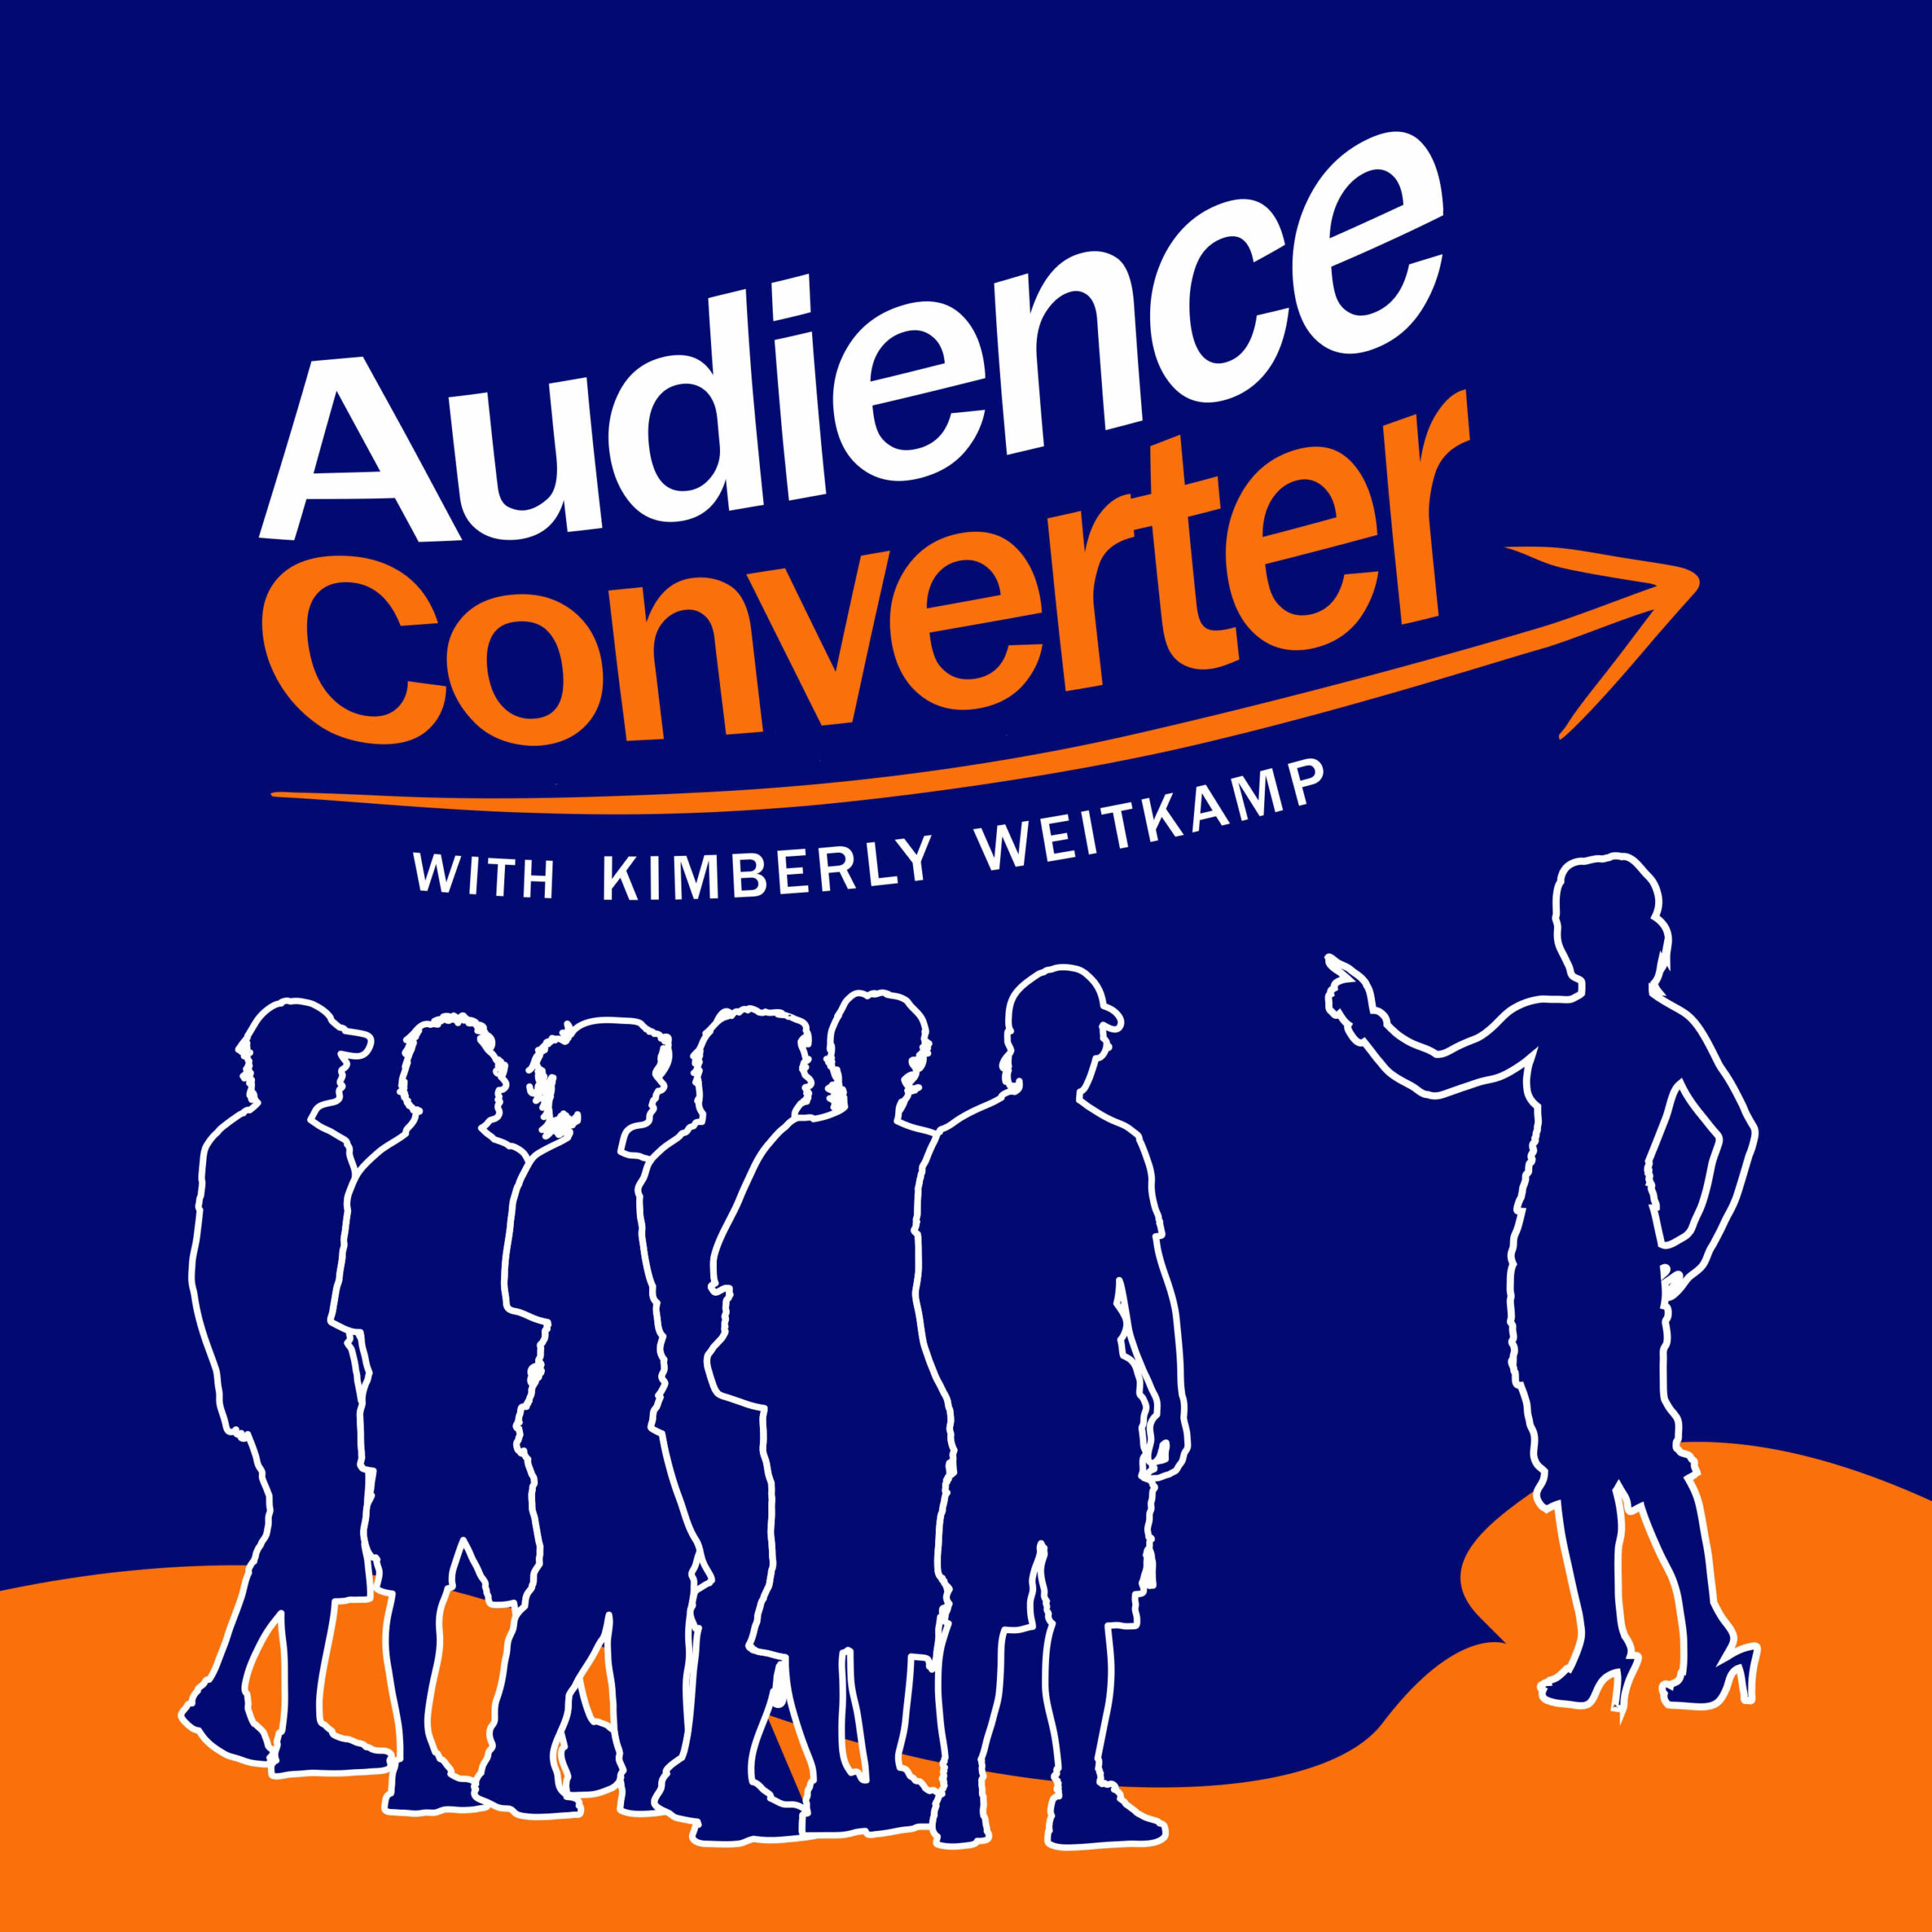 Audience Converter with Kimberly Weitkamp